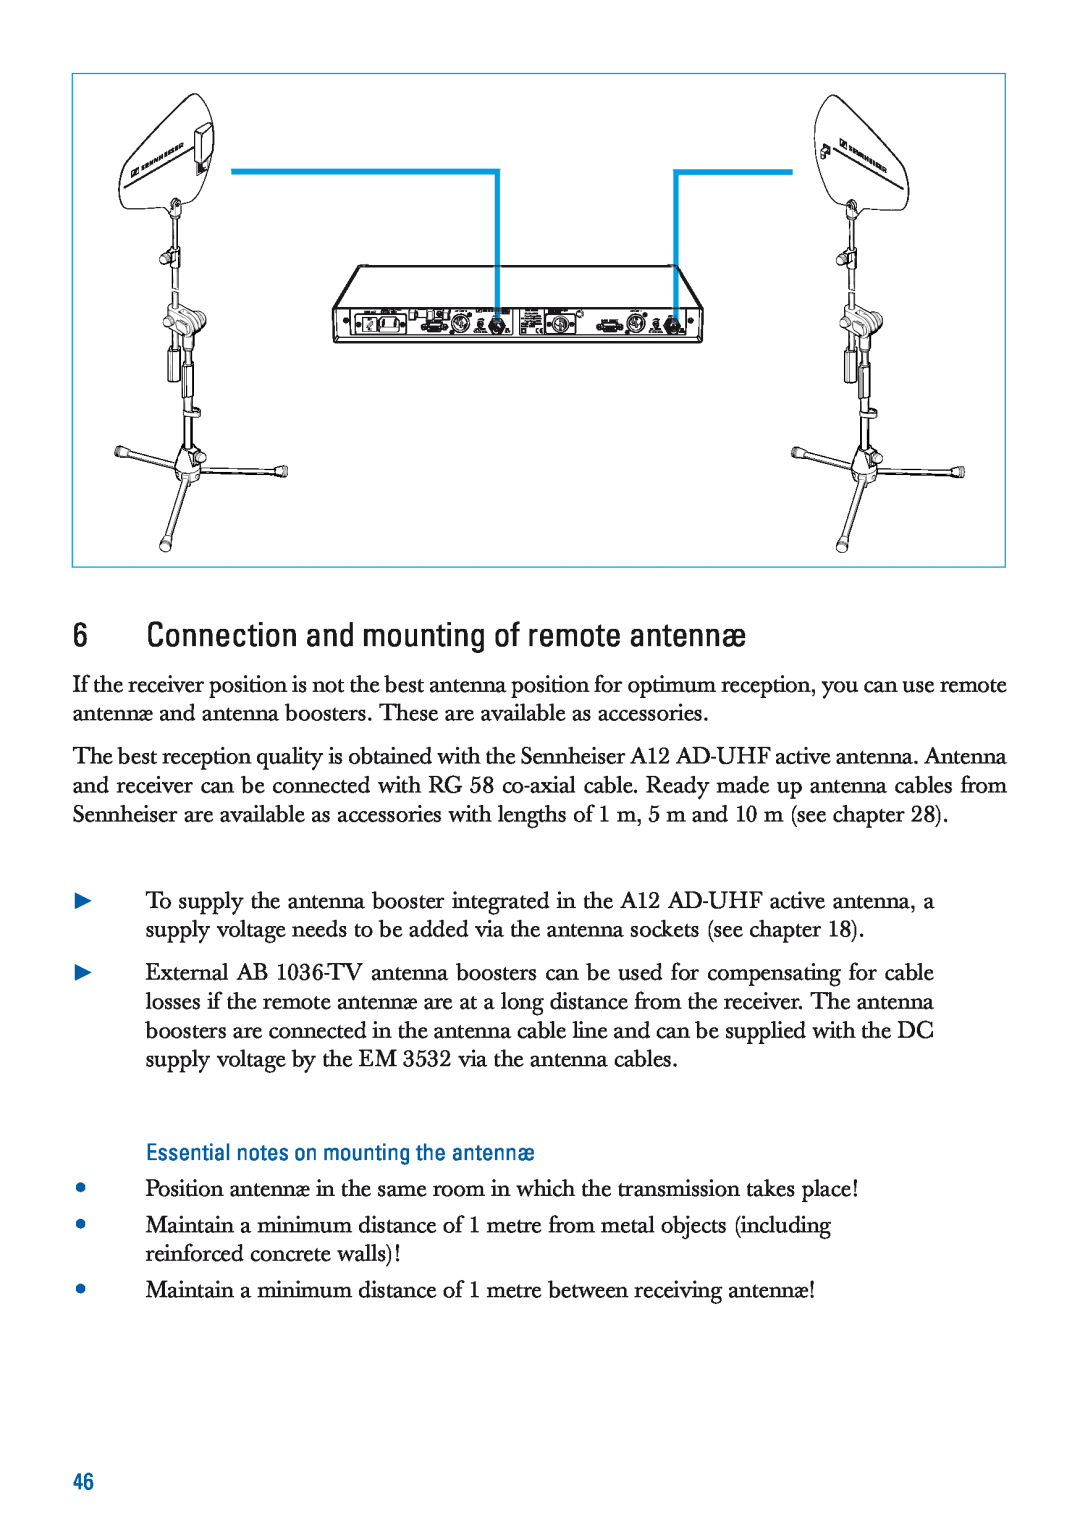 Sennheiser EM 3532-U manual Connection and mounting of remote antennæ, Essential notes on mounting the antennæ 